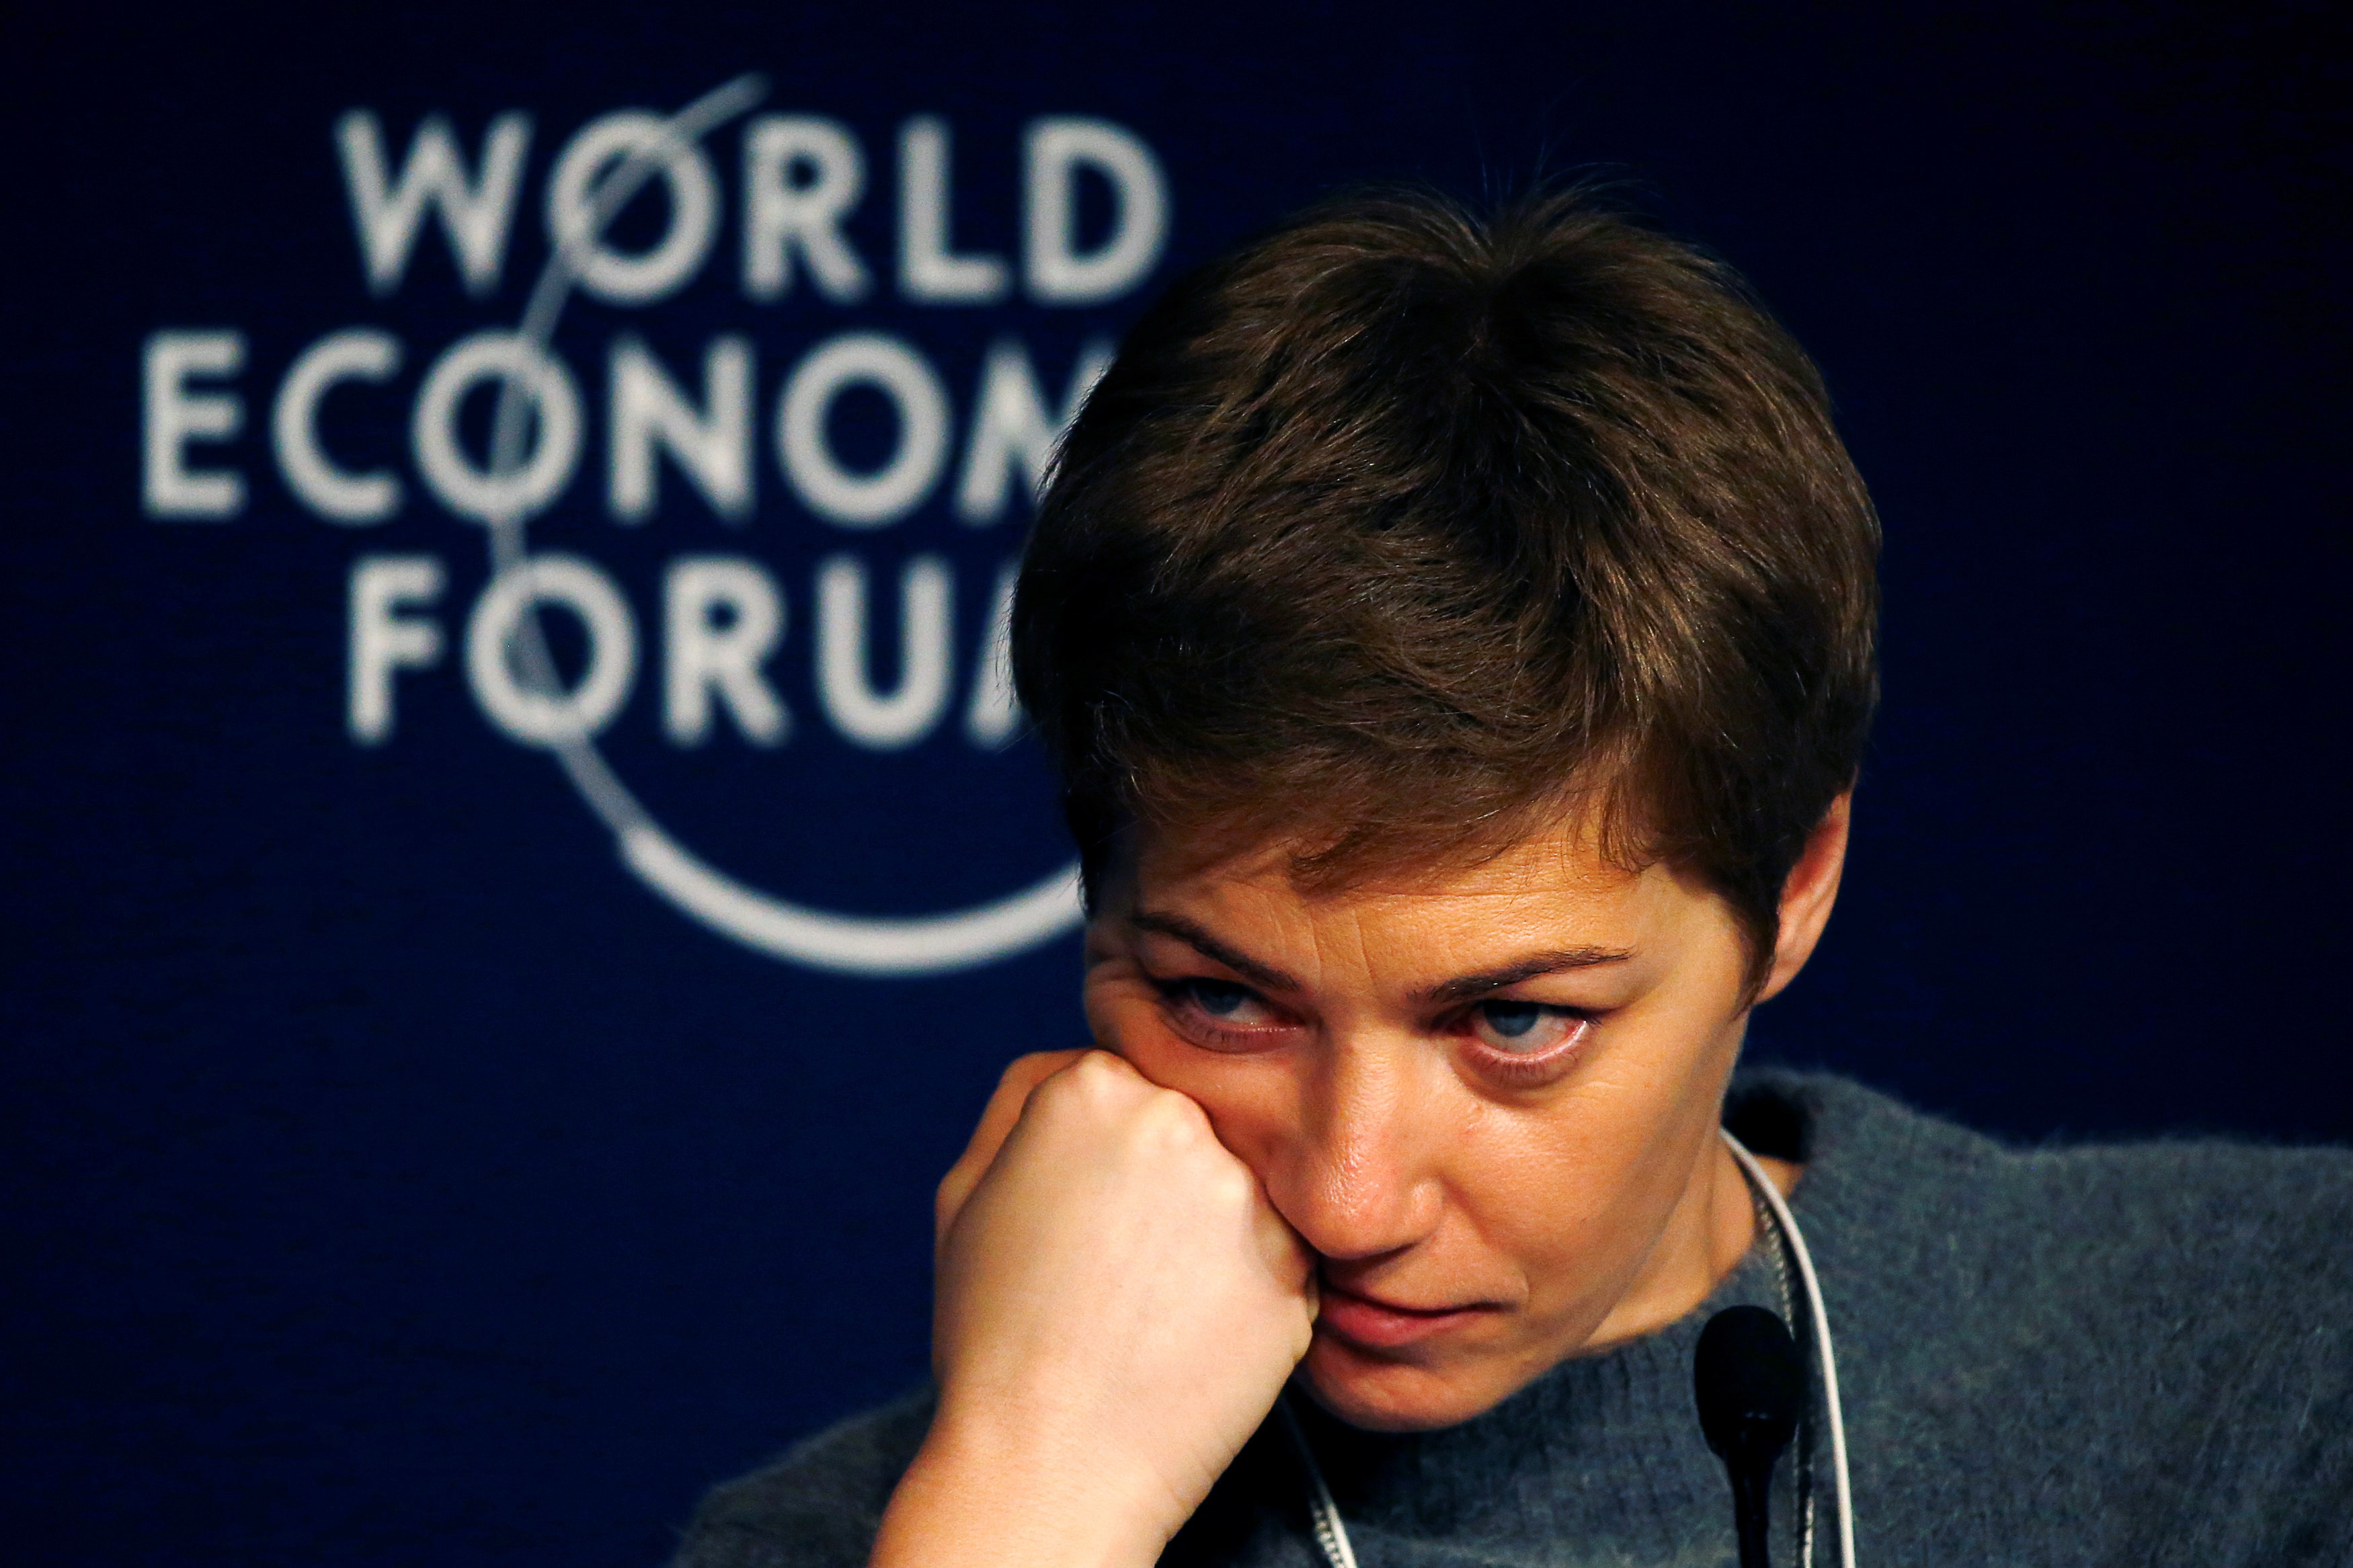 Elizaveta Osetinskaya, Editorial Director of RBC Media Holding, attends the annual meeting of the World Economic Forum (WEF) in Davos, Switzerland 22 January 2016, REUTERS/Ruben Sprich/File